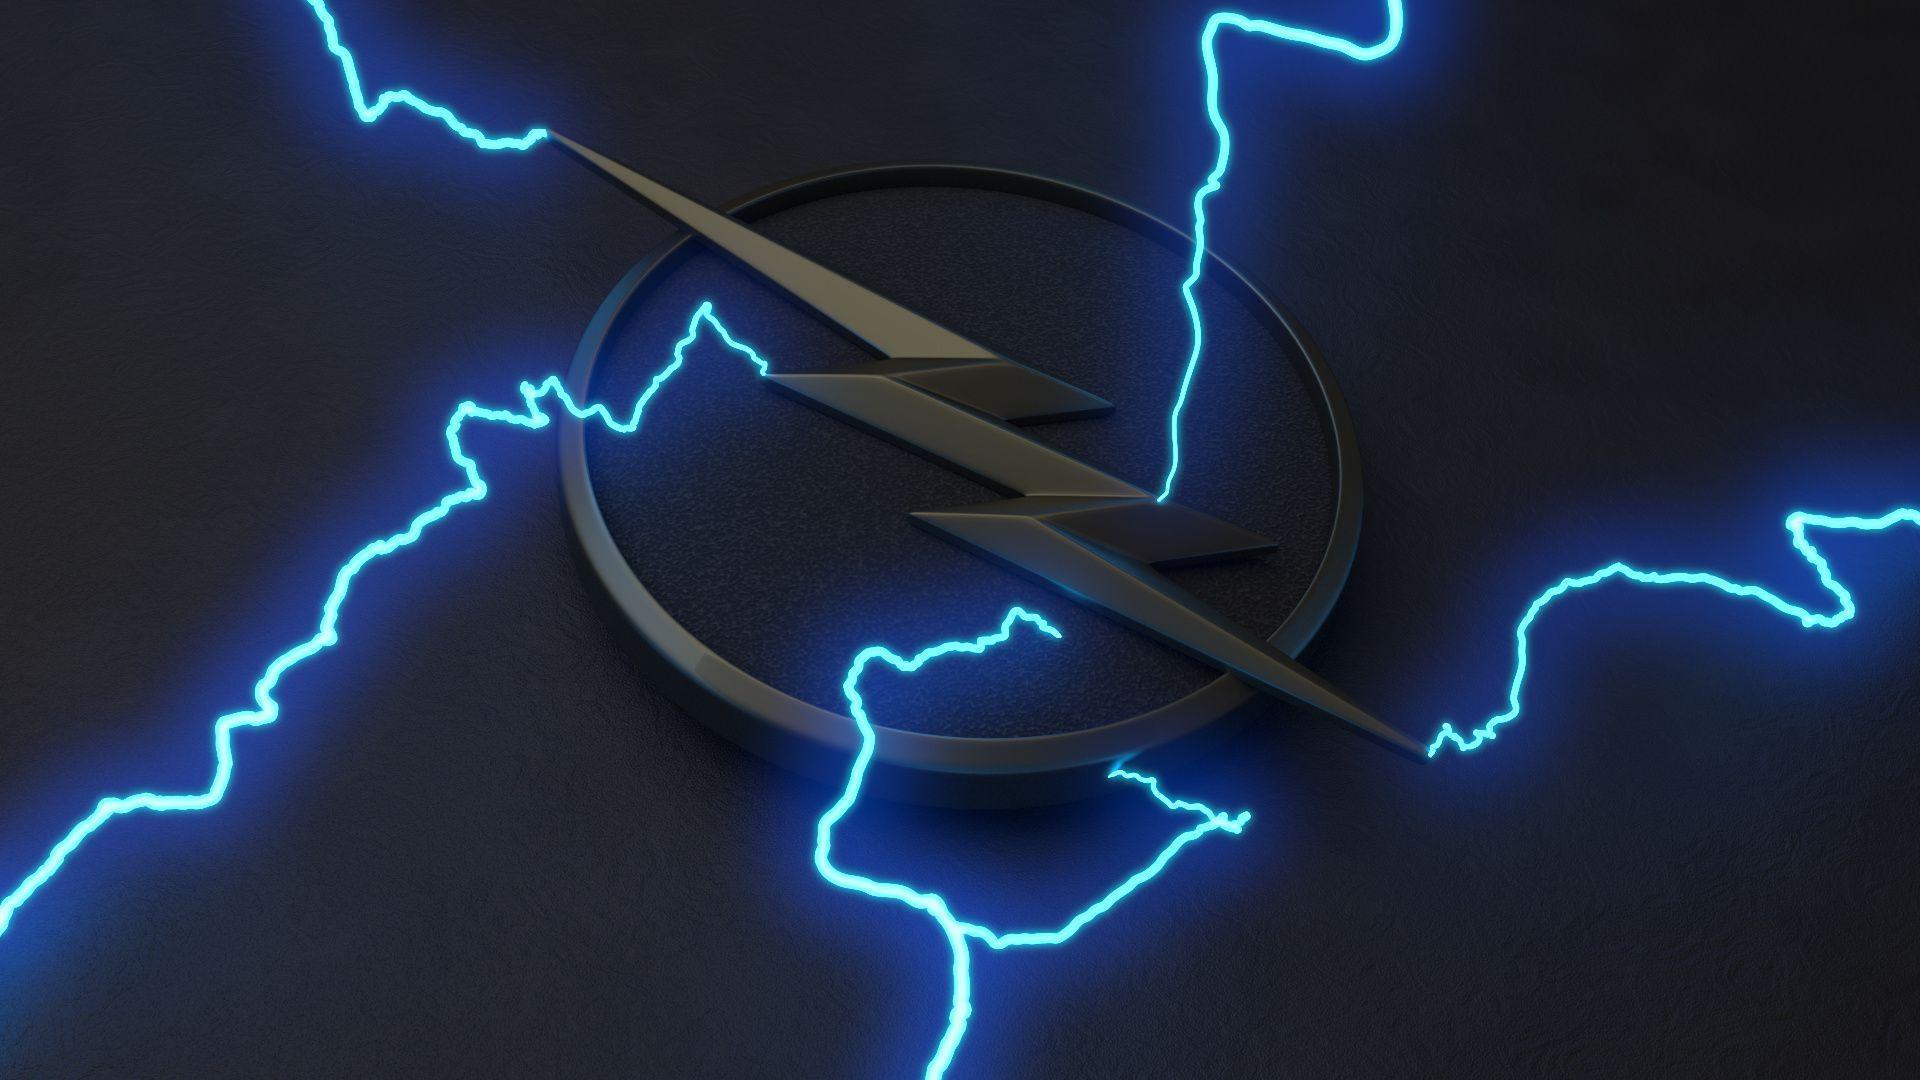 Electrified 3D Zoom wallpaper [1080p] more sizes and another